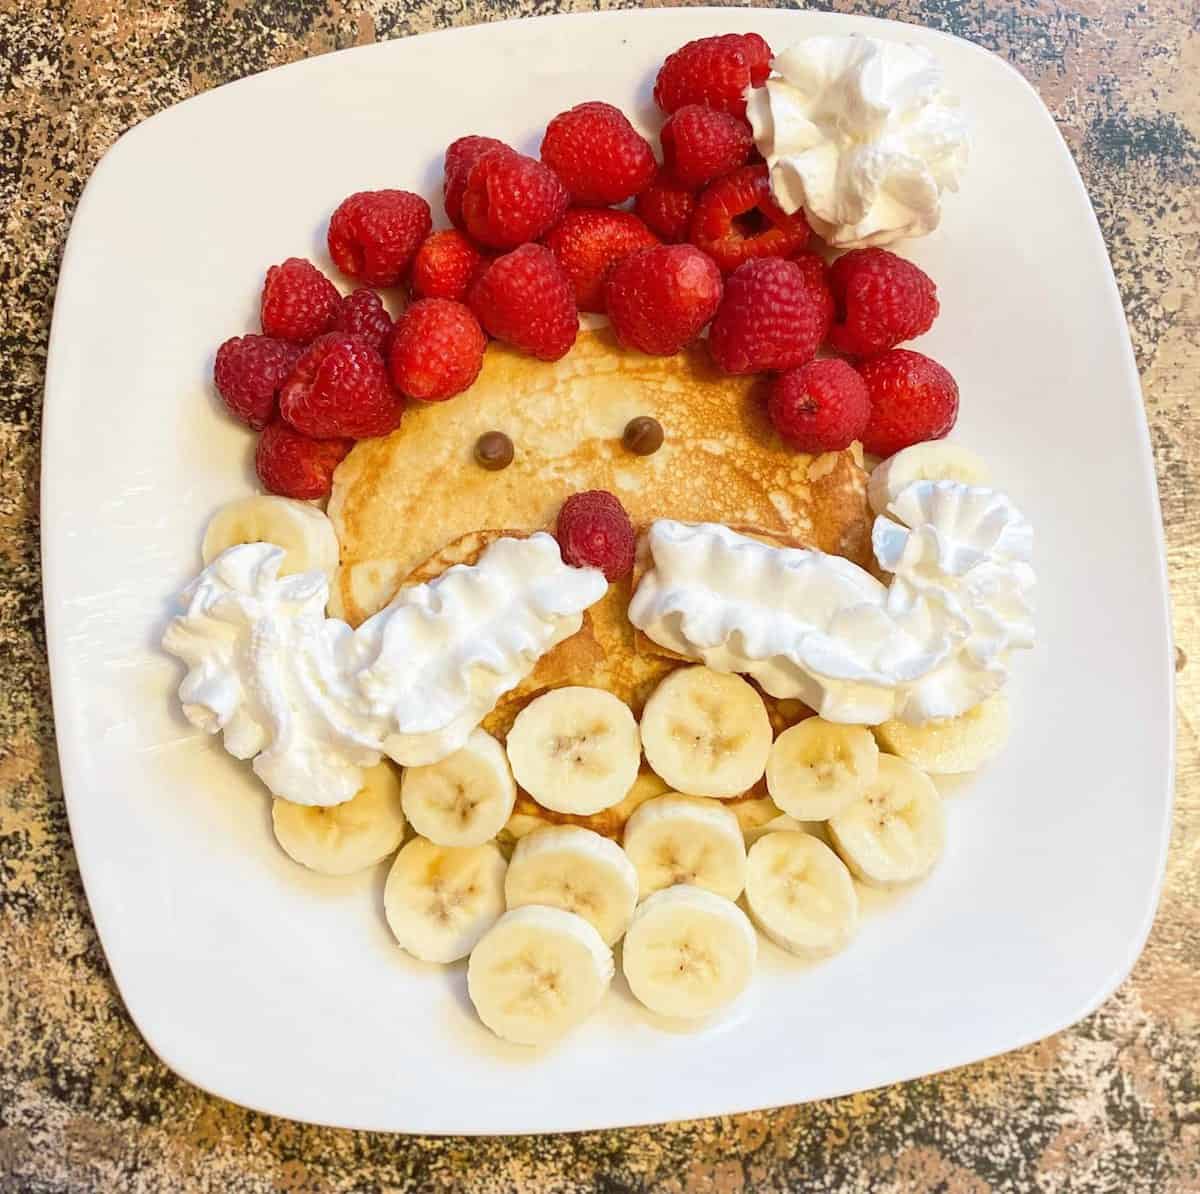 Easy Santa Pancakes for Christmas breakfast with whipped cream for his mustache, bananas for his beard, and raspberries for his hat